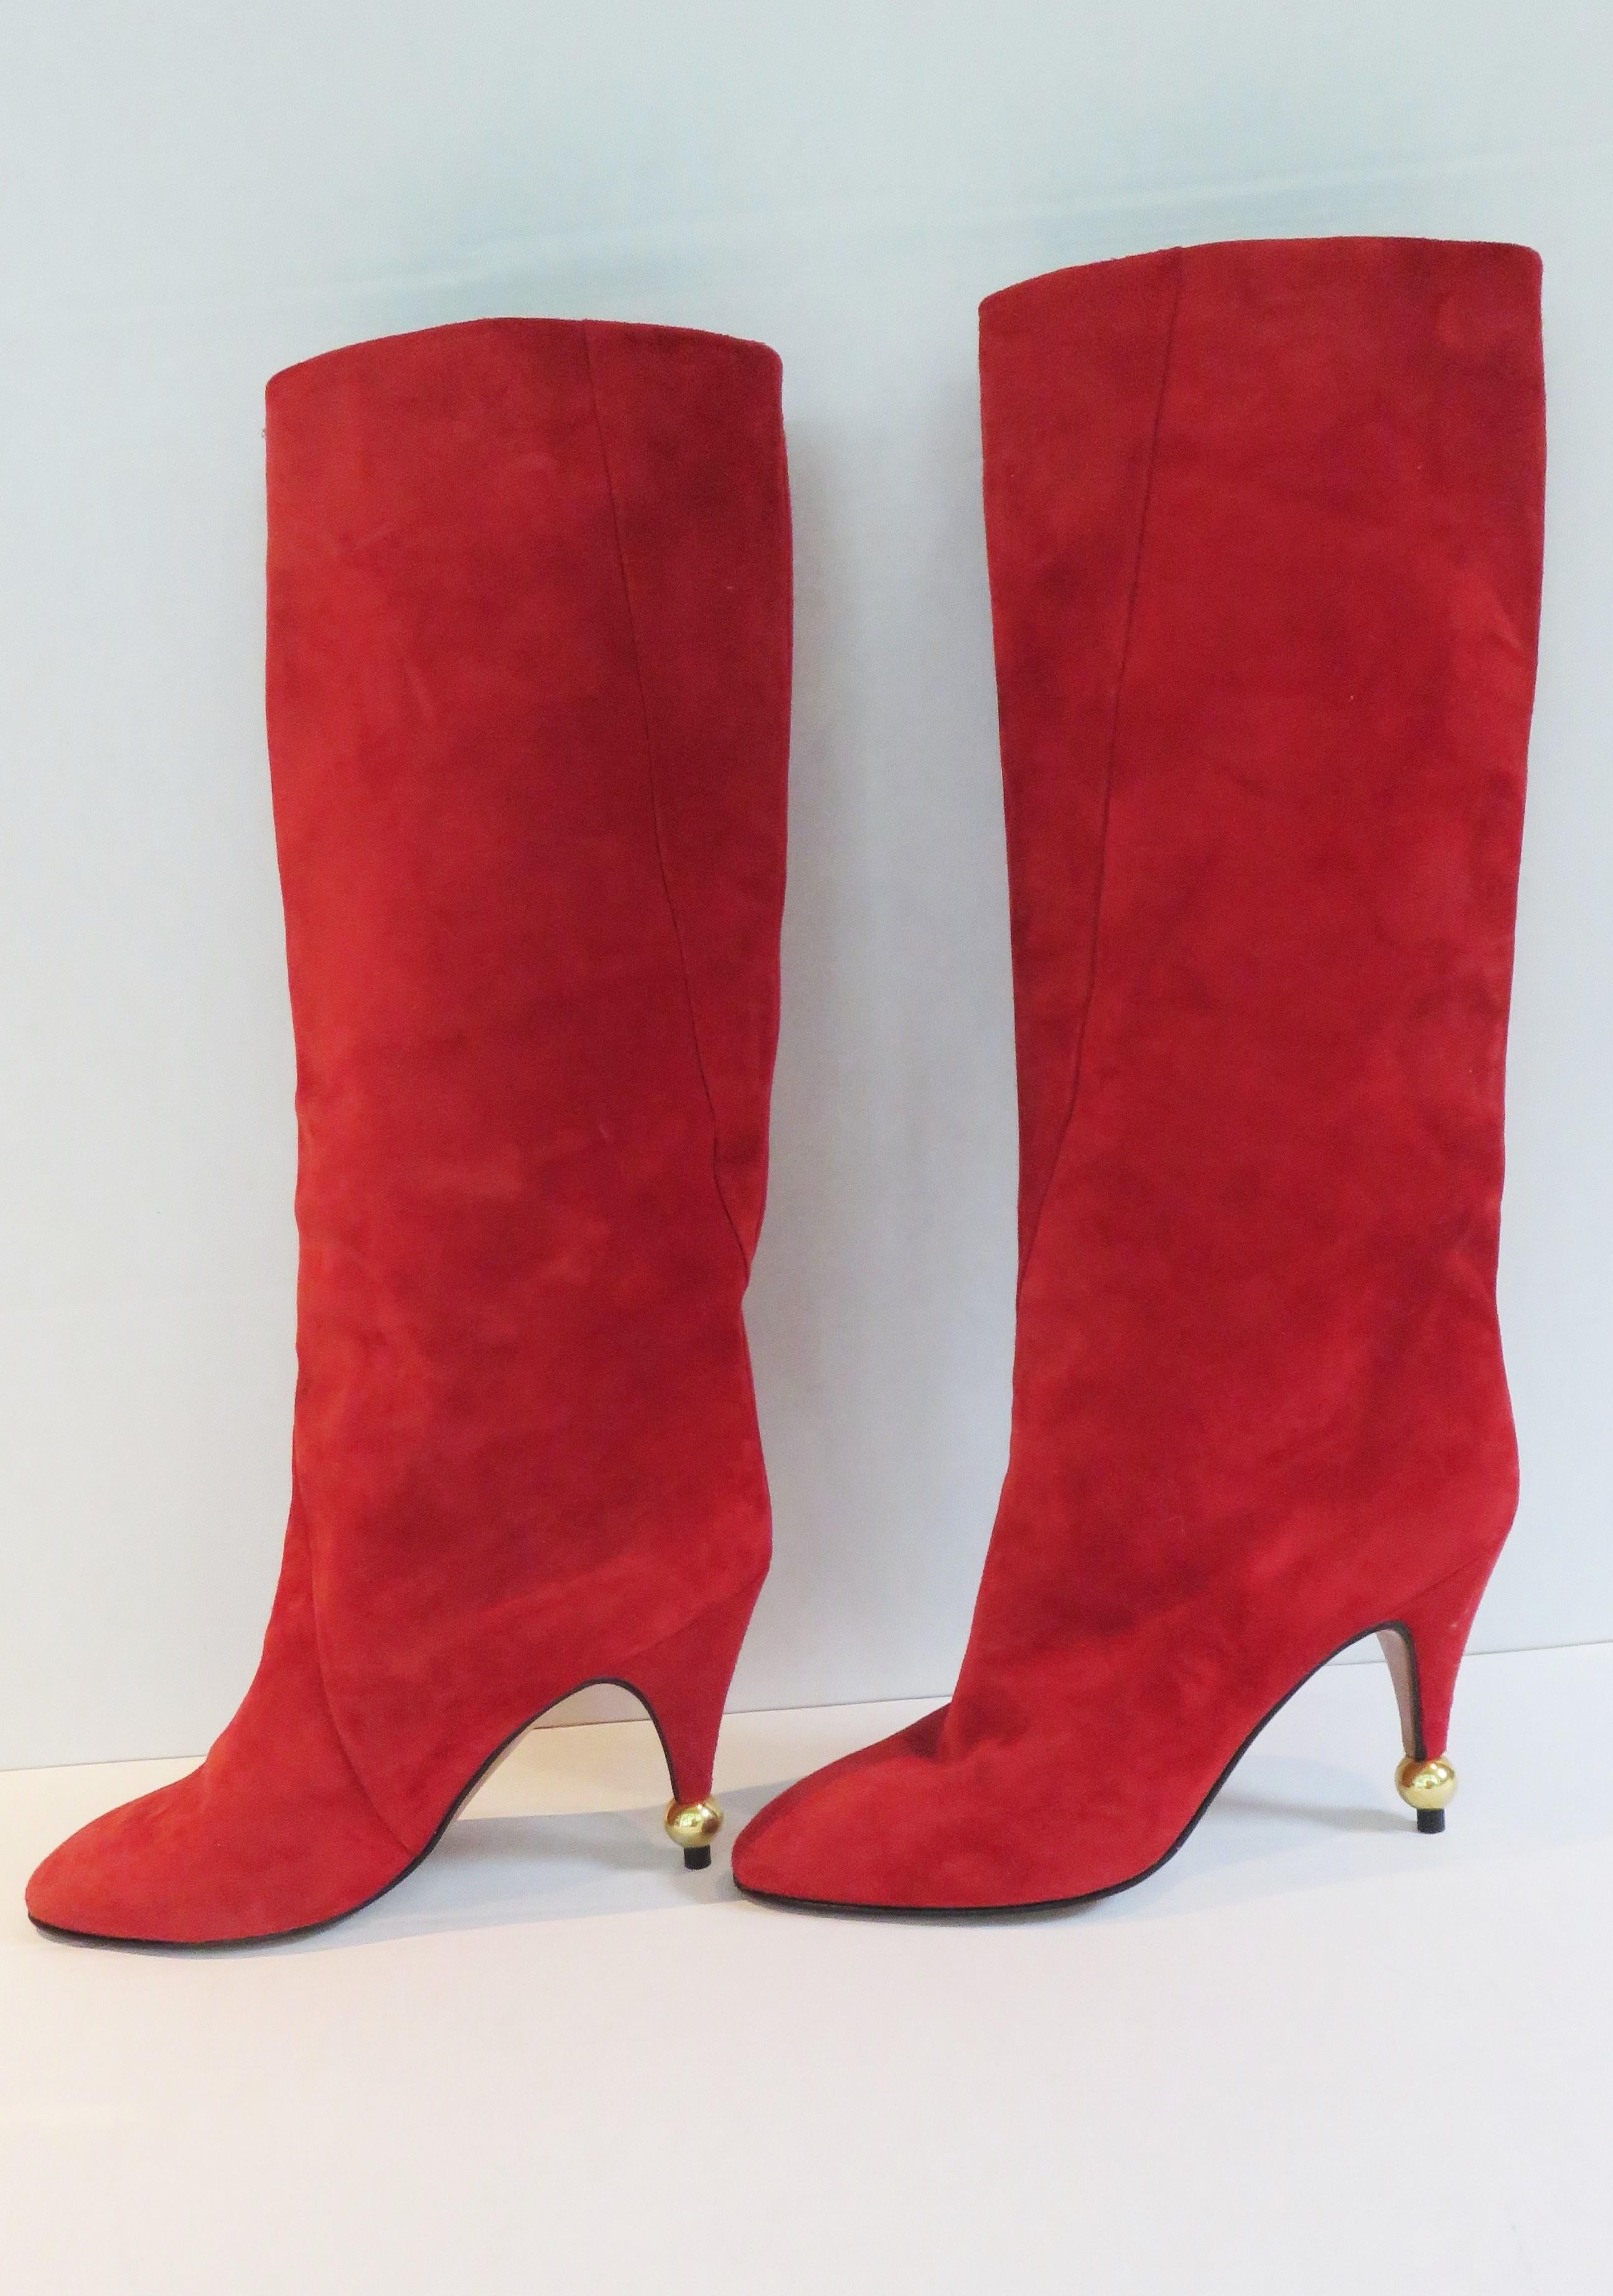 Roger Vivier New Vintage 1980s Suede Ball Heel Boots Size 8 For Sale 1